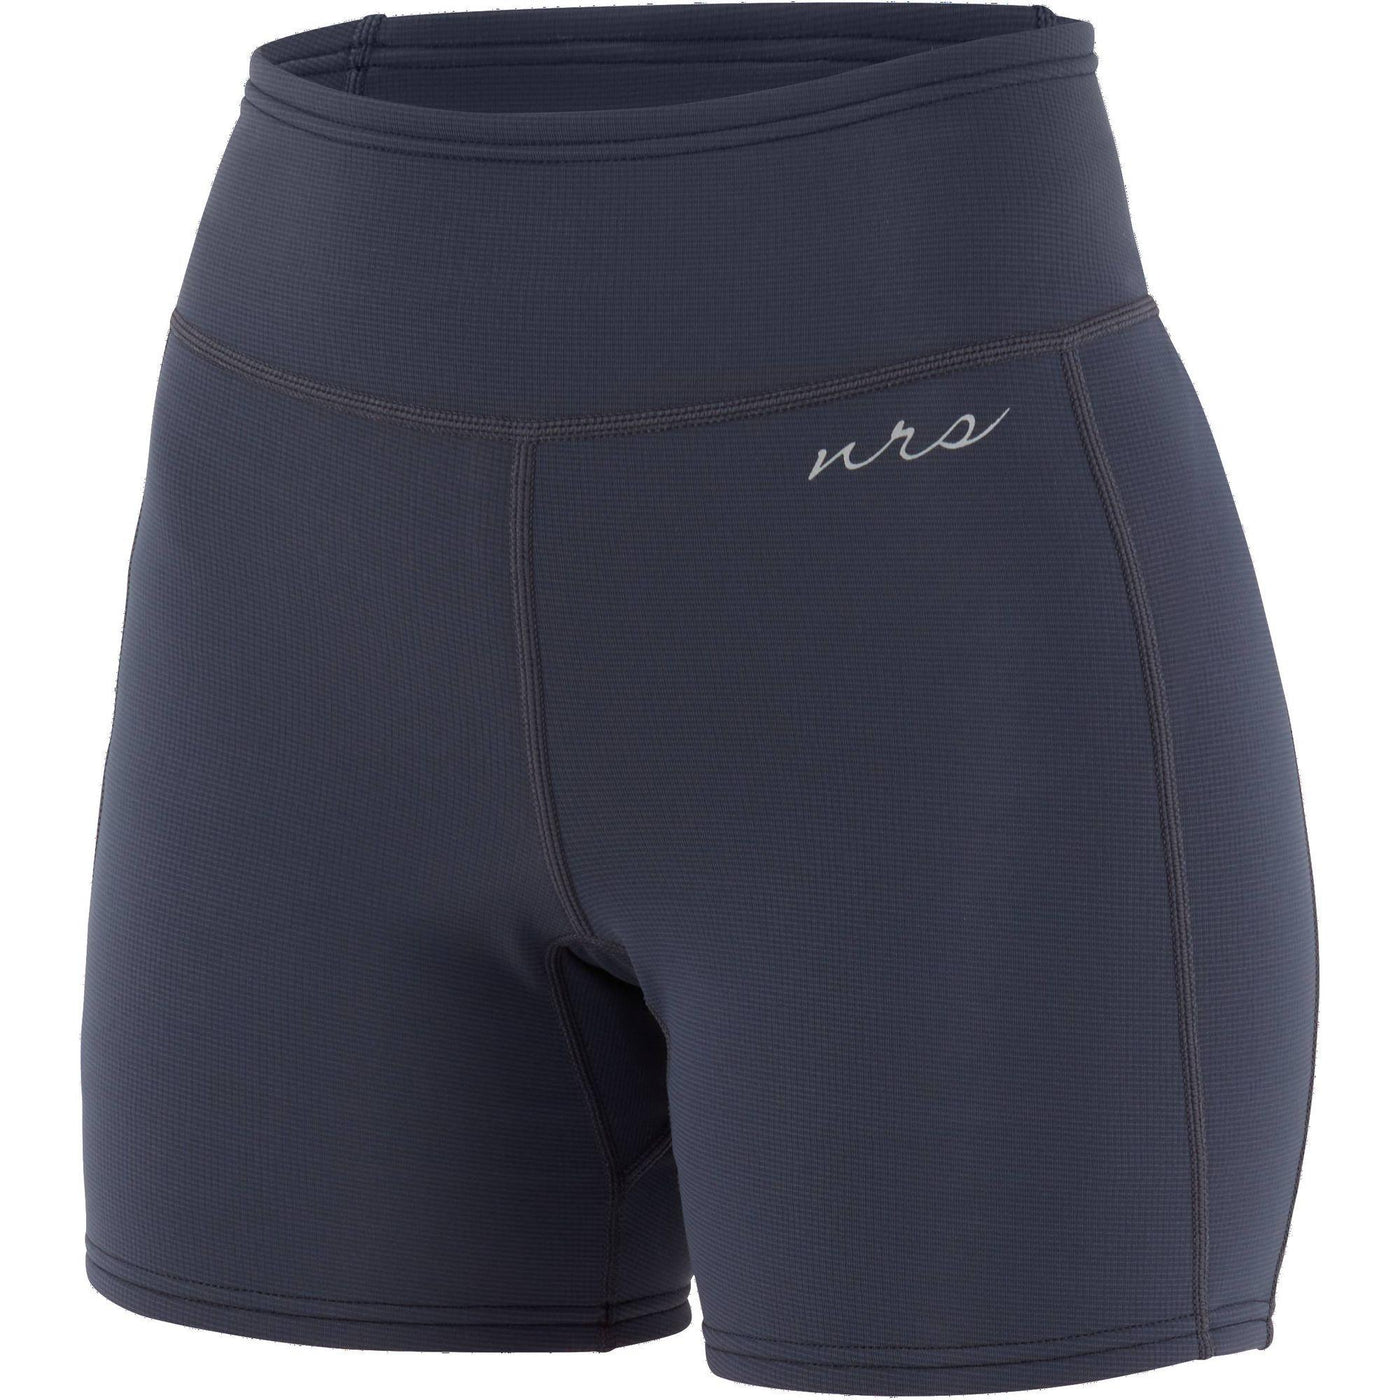 NRS Womens HydroSkin 0.5 Short (clearance)